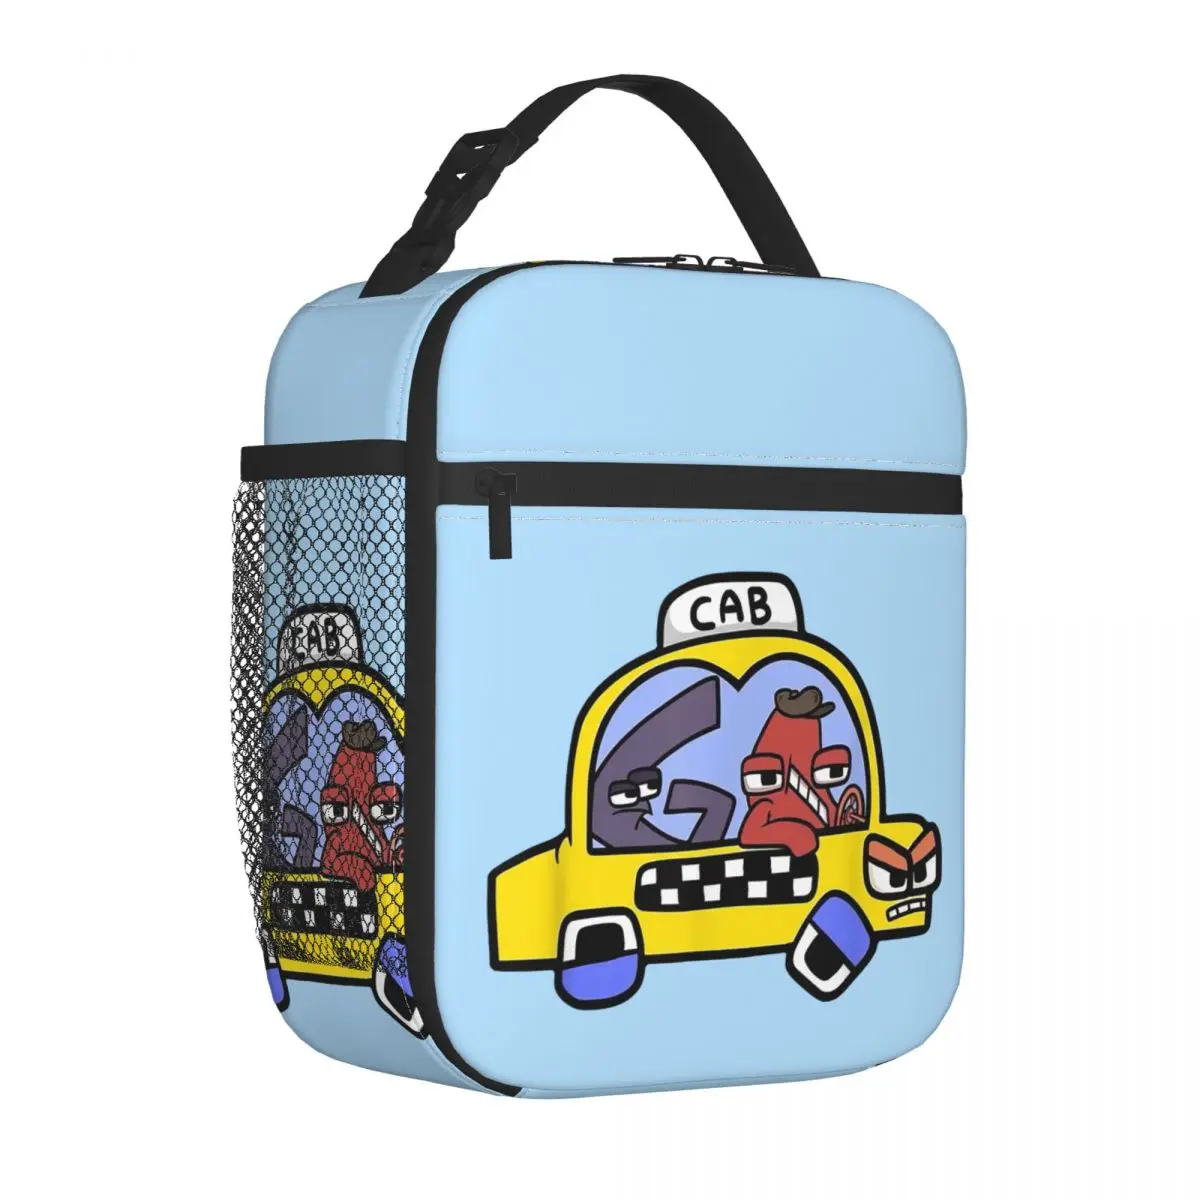 

Alphabet Lore Cab Insulated Lunch Bag High Capacity Matching Learning Letters Lunch Container Thermal Bag Tote Lunch Box Office